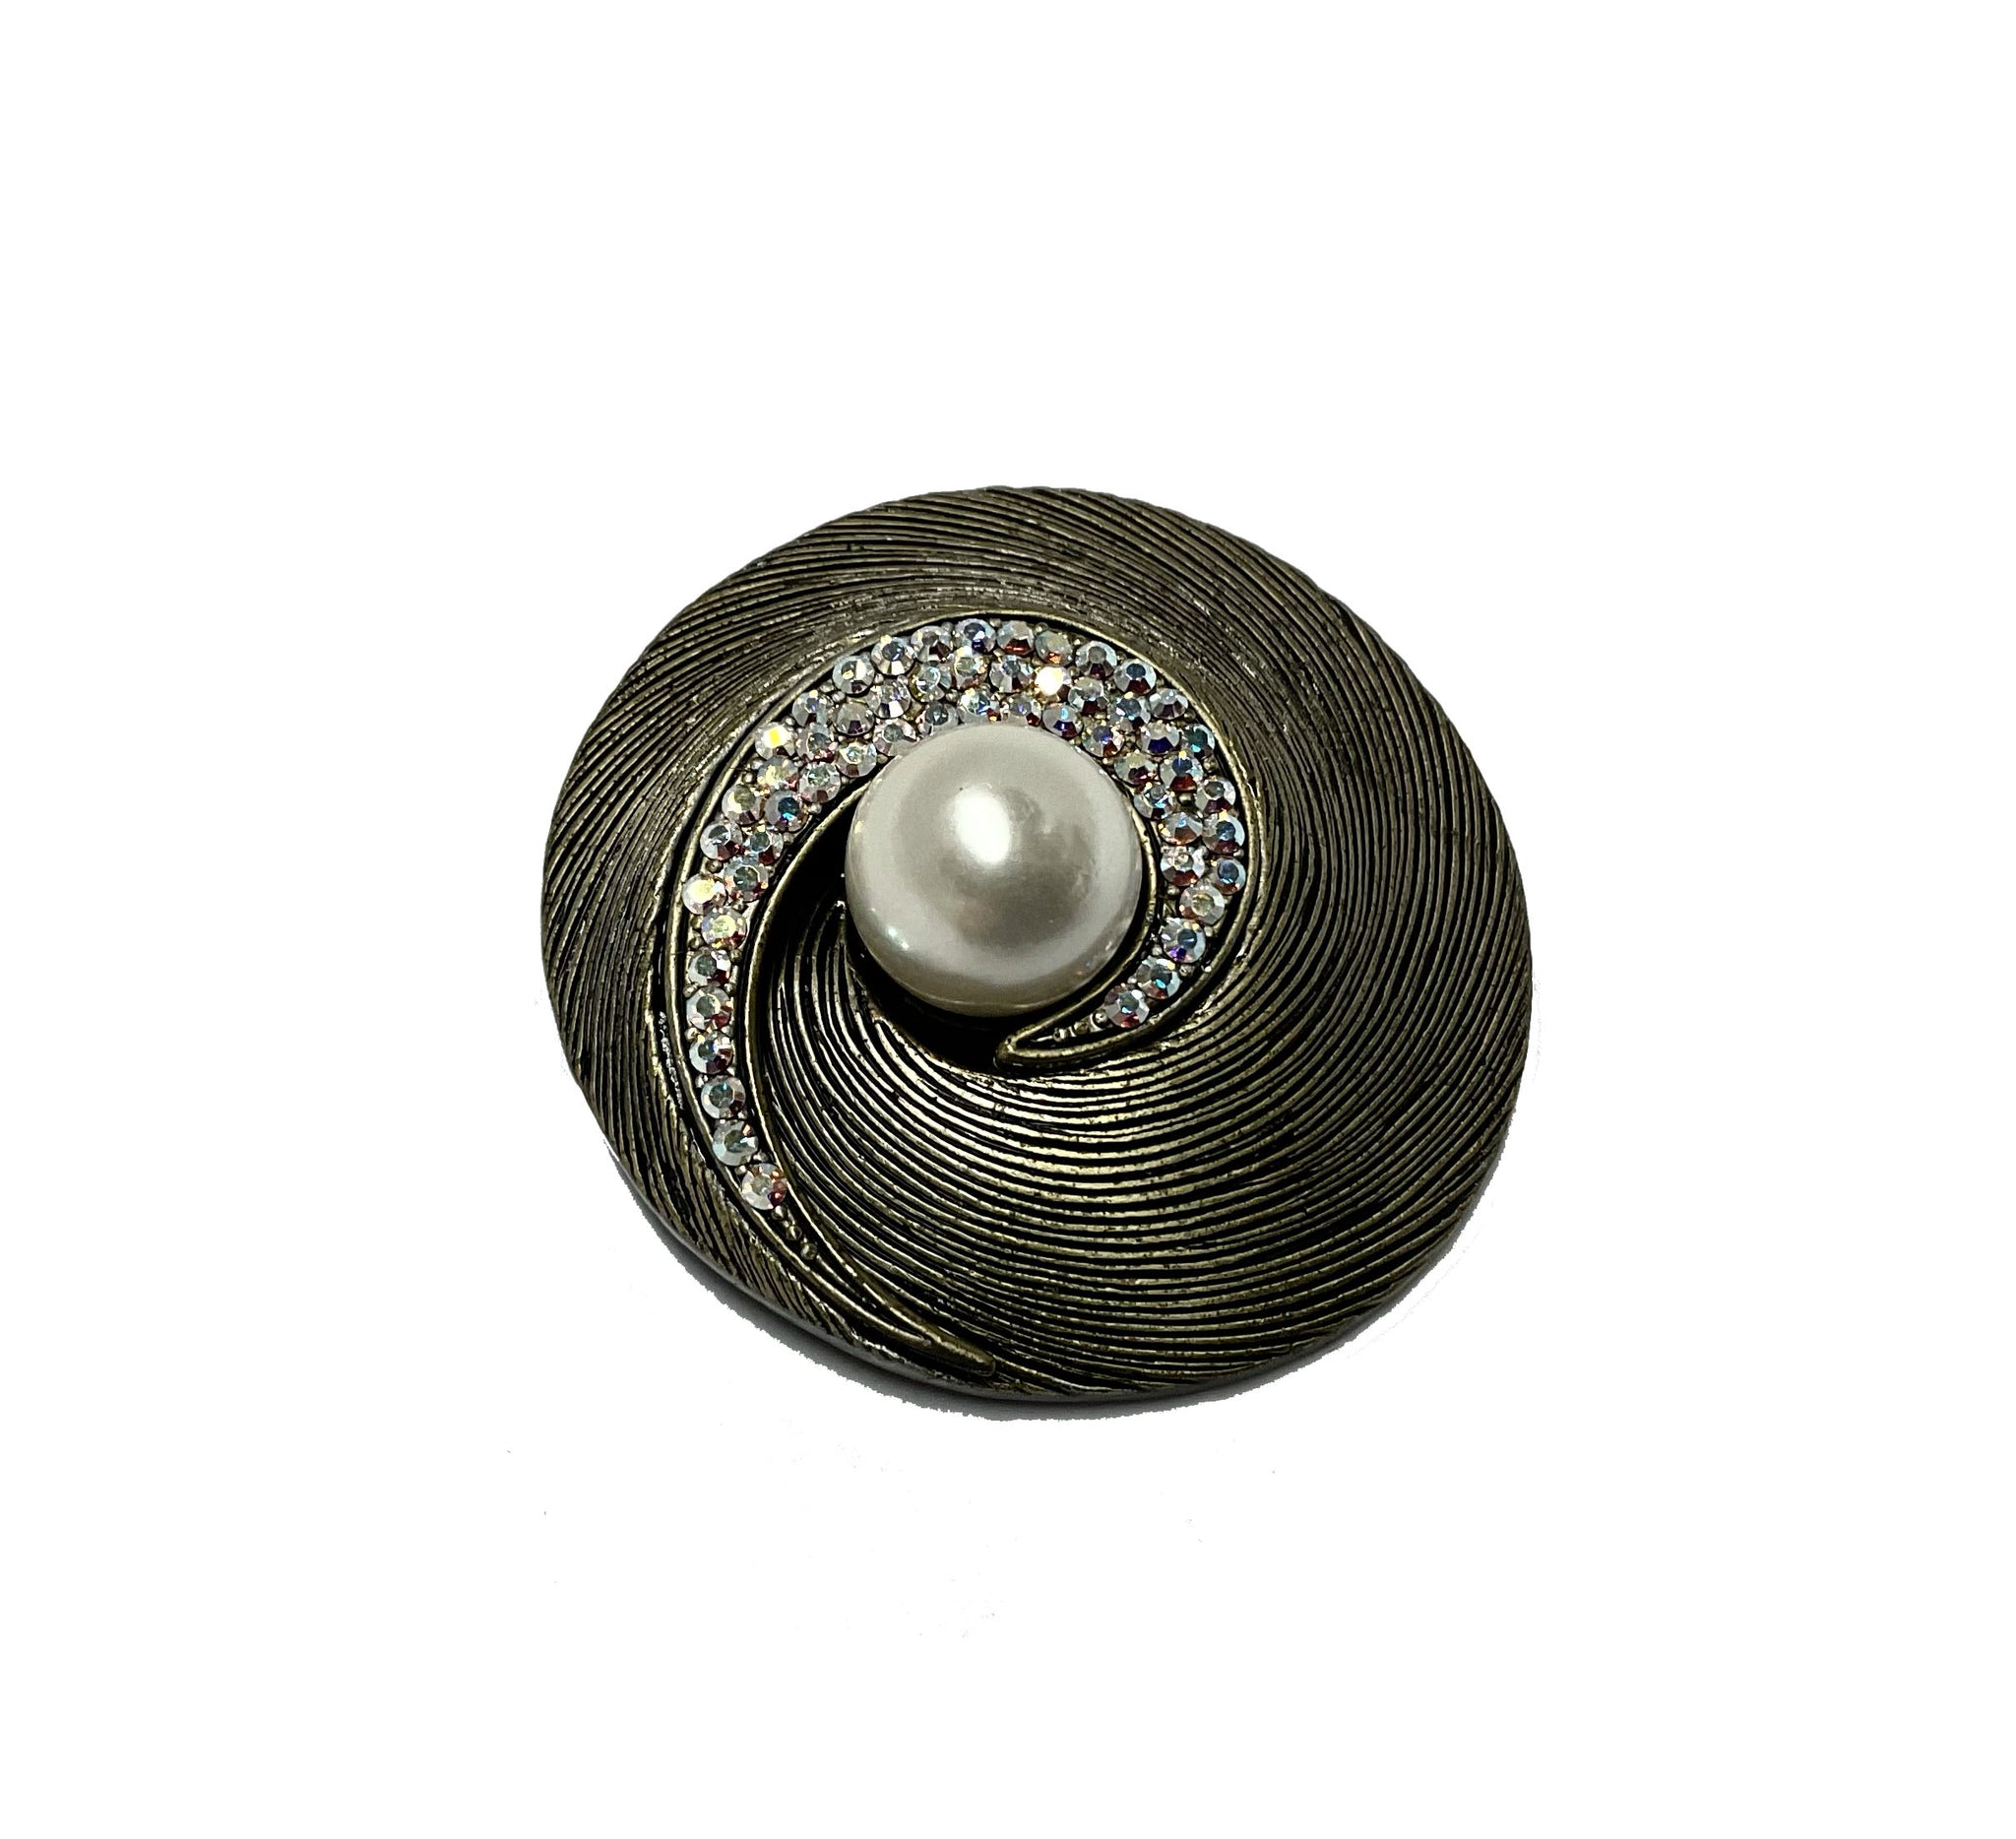 Scarf Ring / Silver Pearl